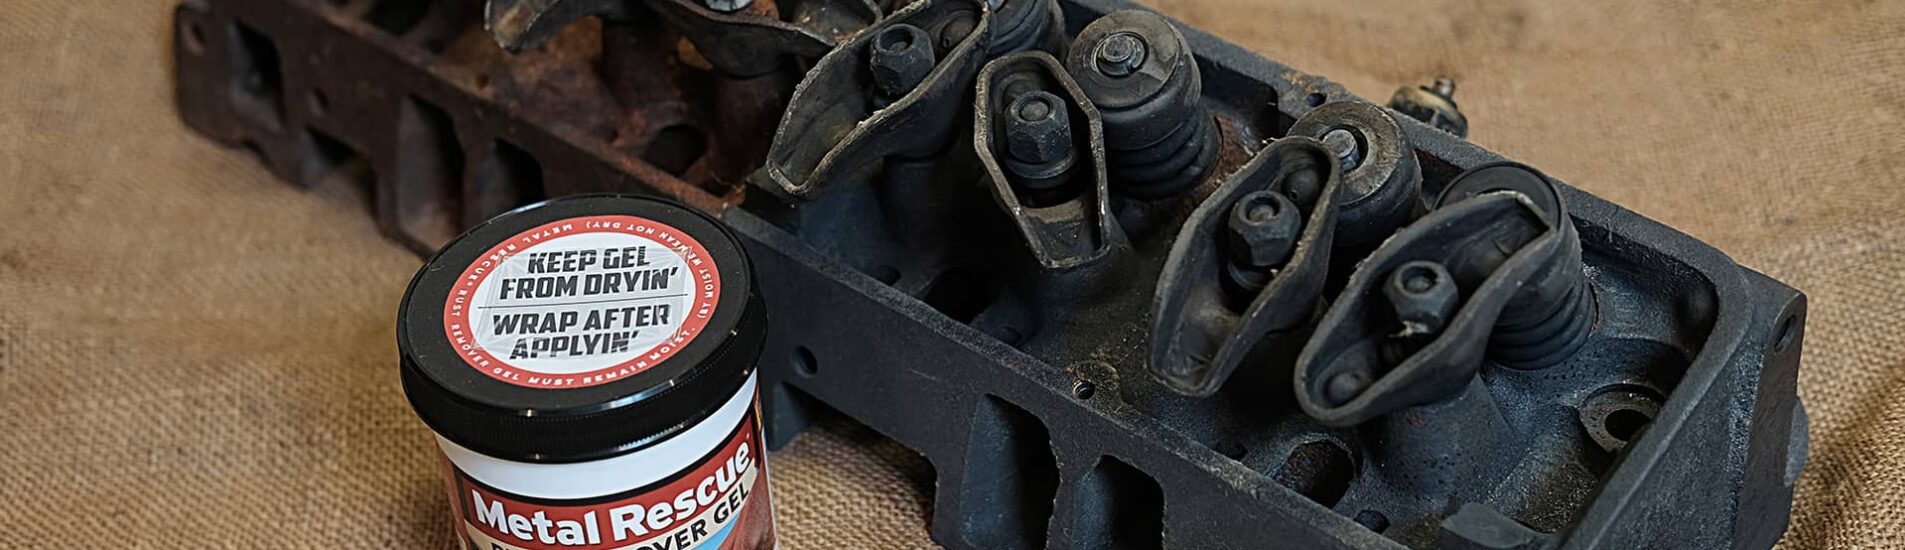 Metal Rescue Rust Remover GEL next to engine component